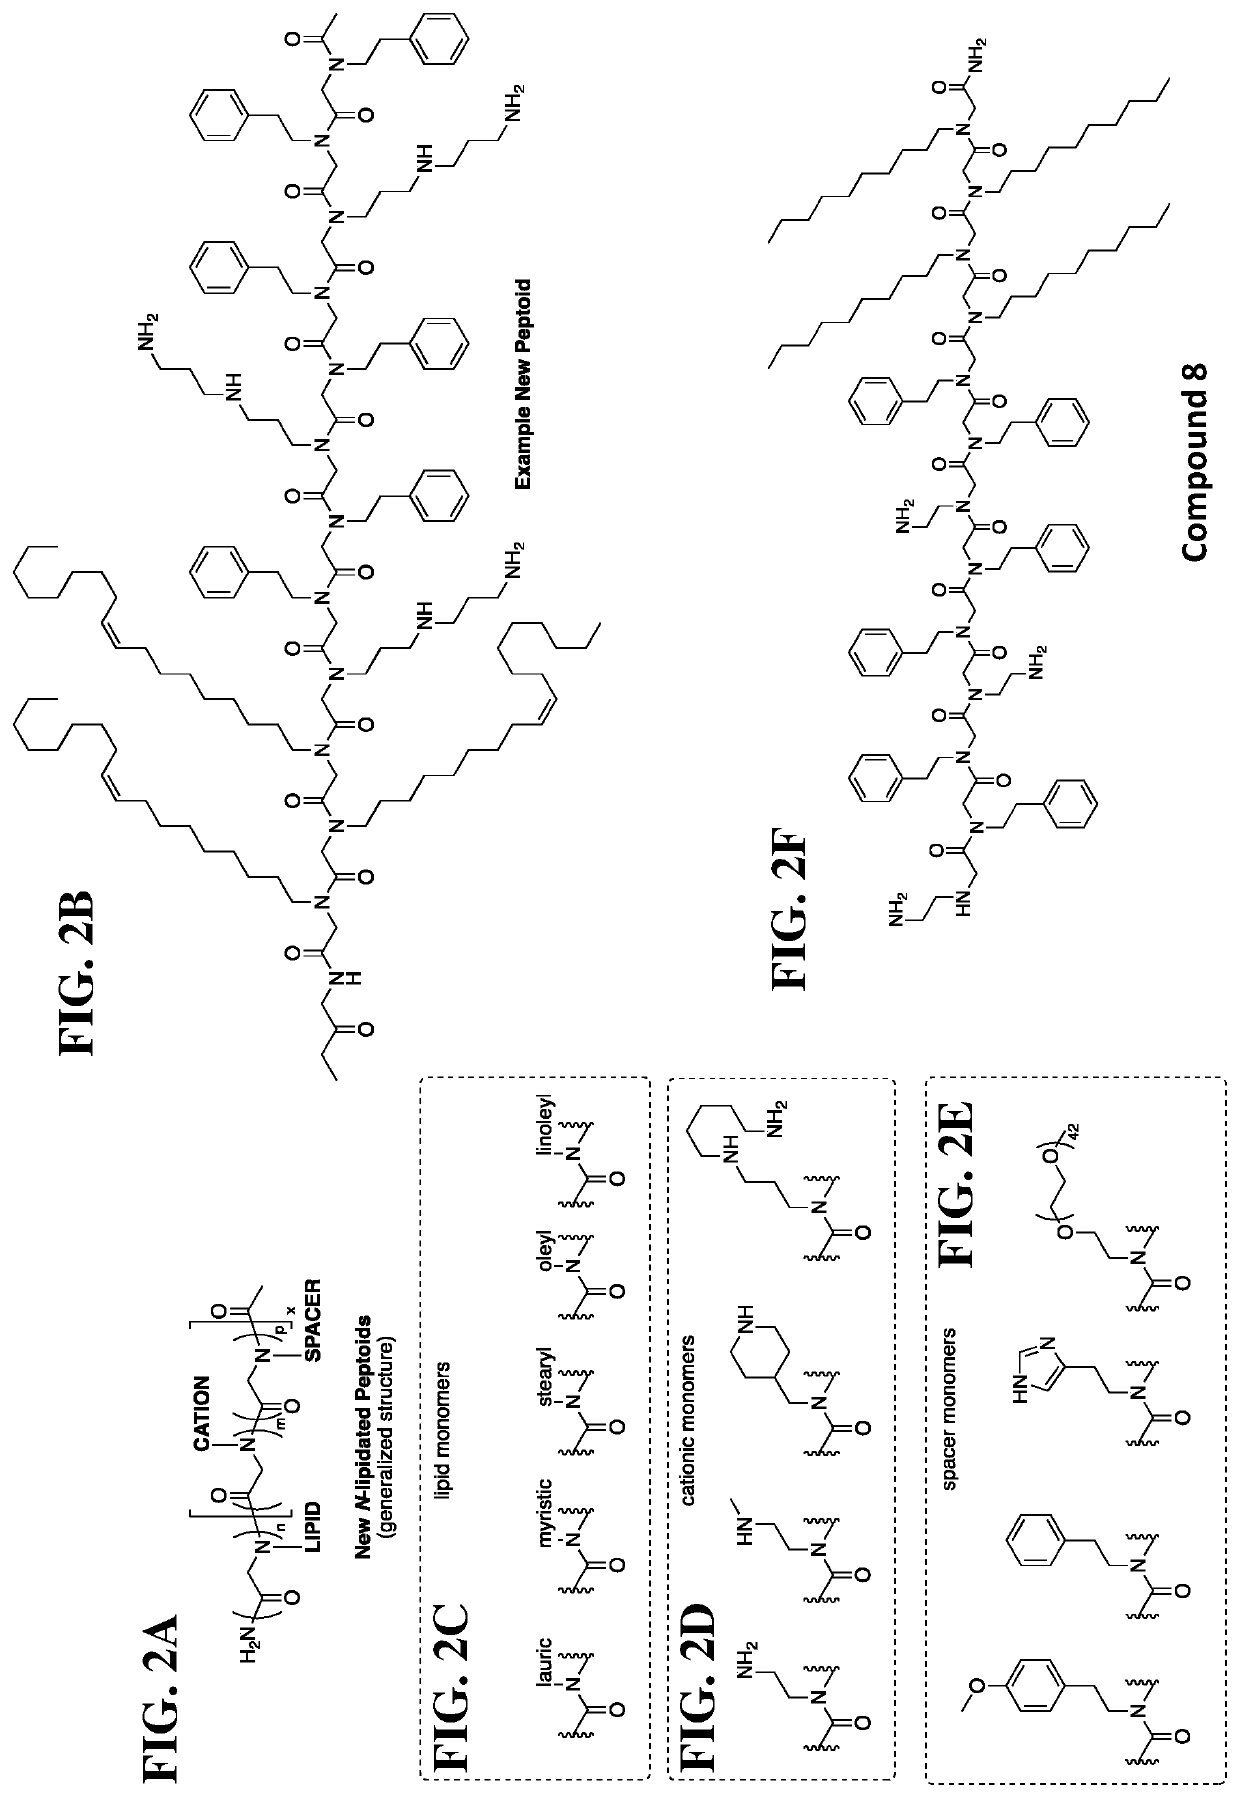 Lipidated cationic peptide-peg compositions for nucleic acid delivery